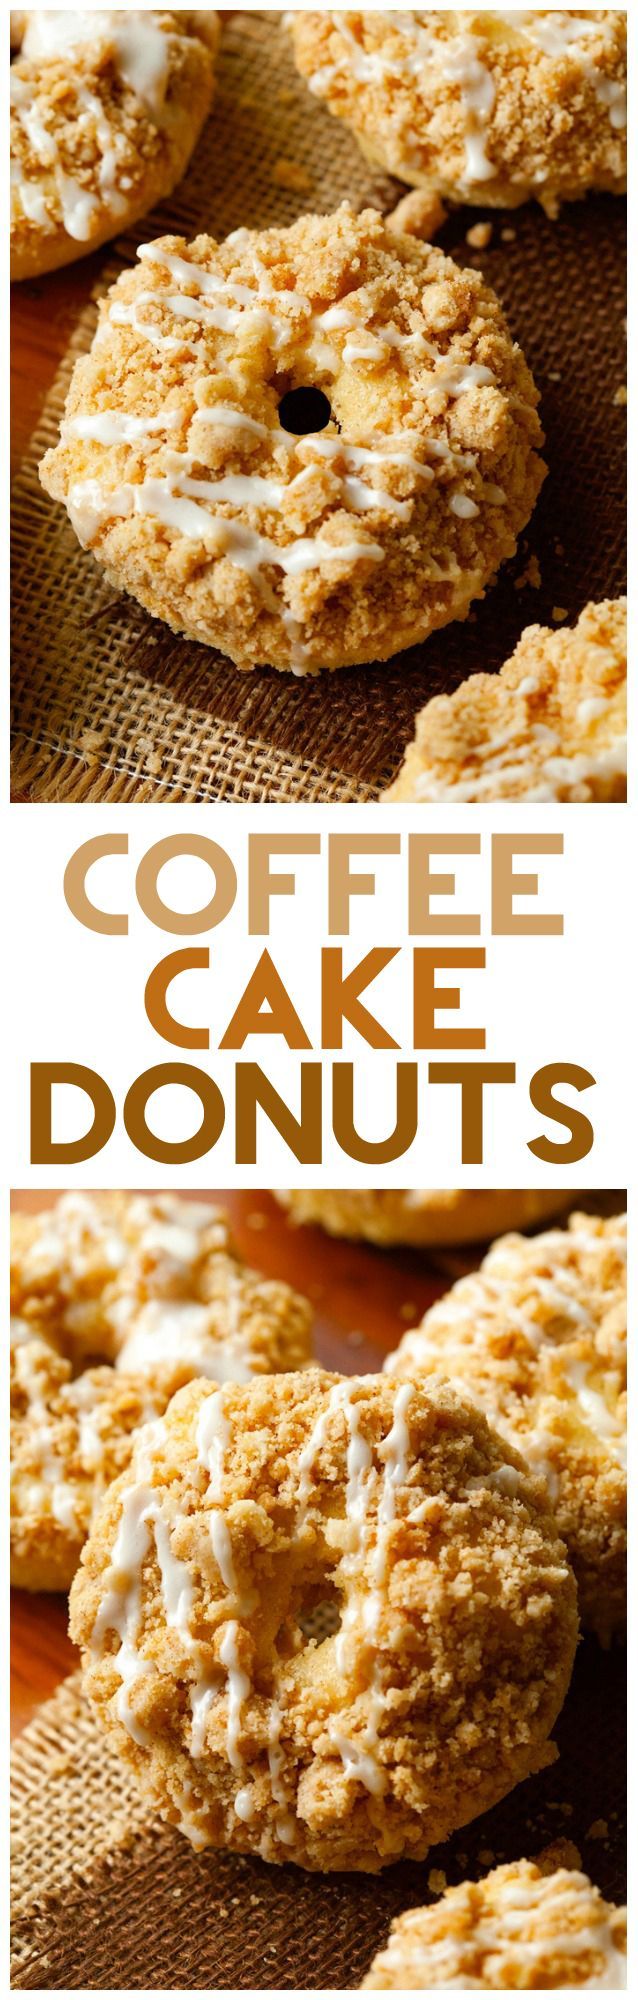 Coffee Cake Donuts… A delicious crumb topping and glazed top a delicious donut… what is not to love?!